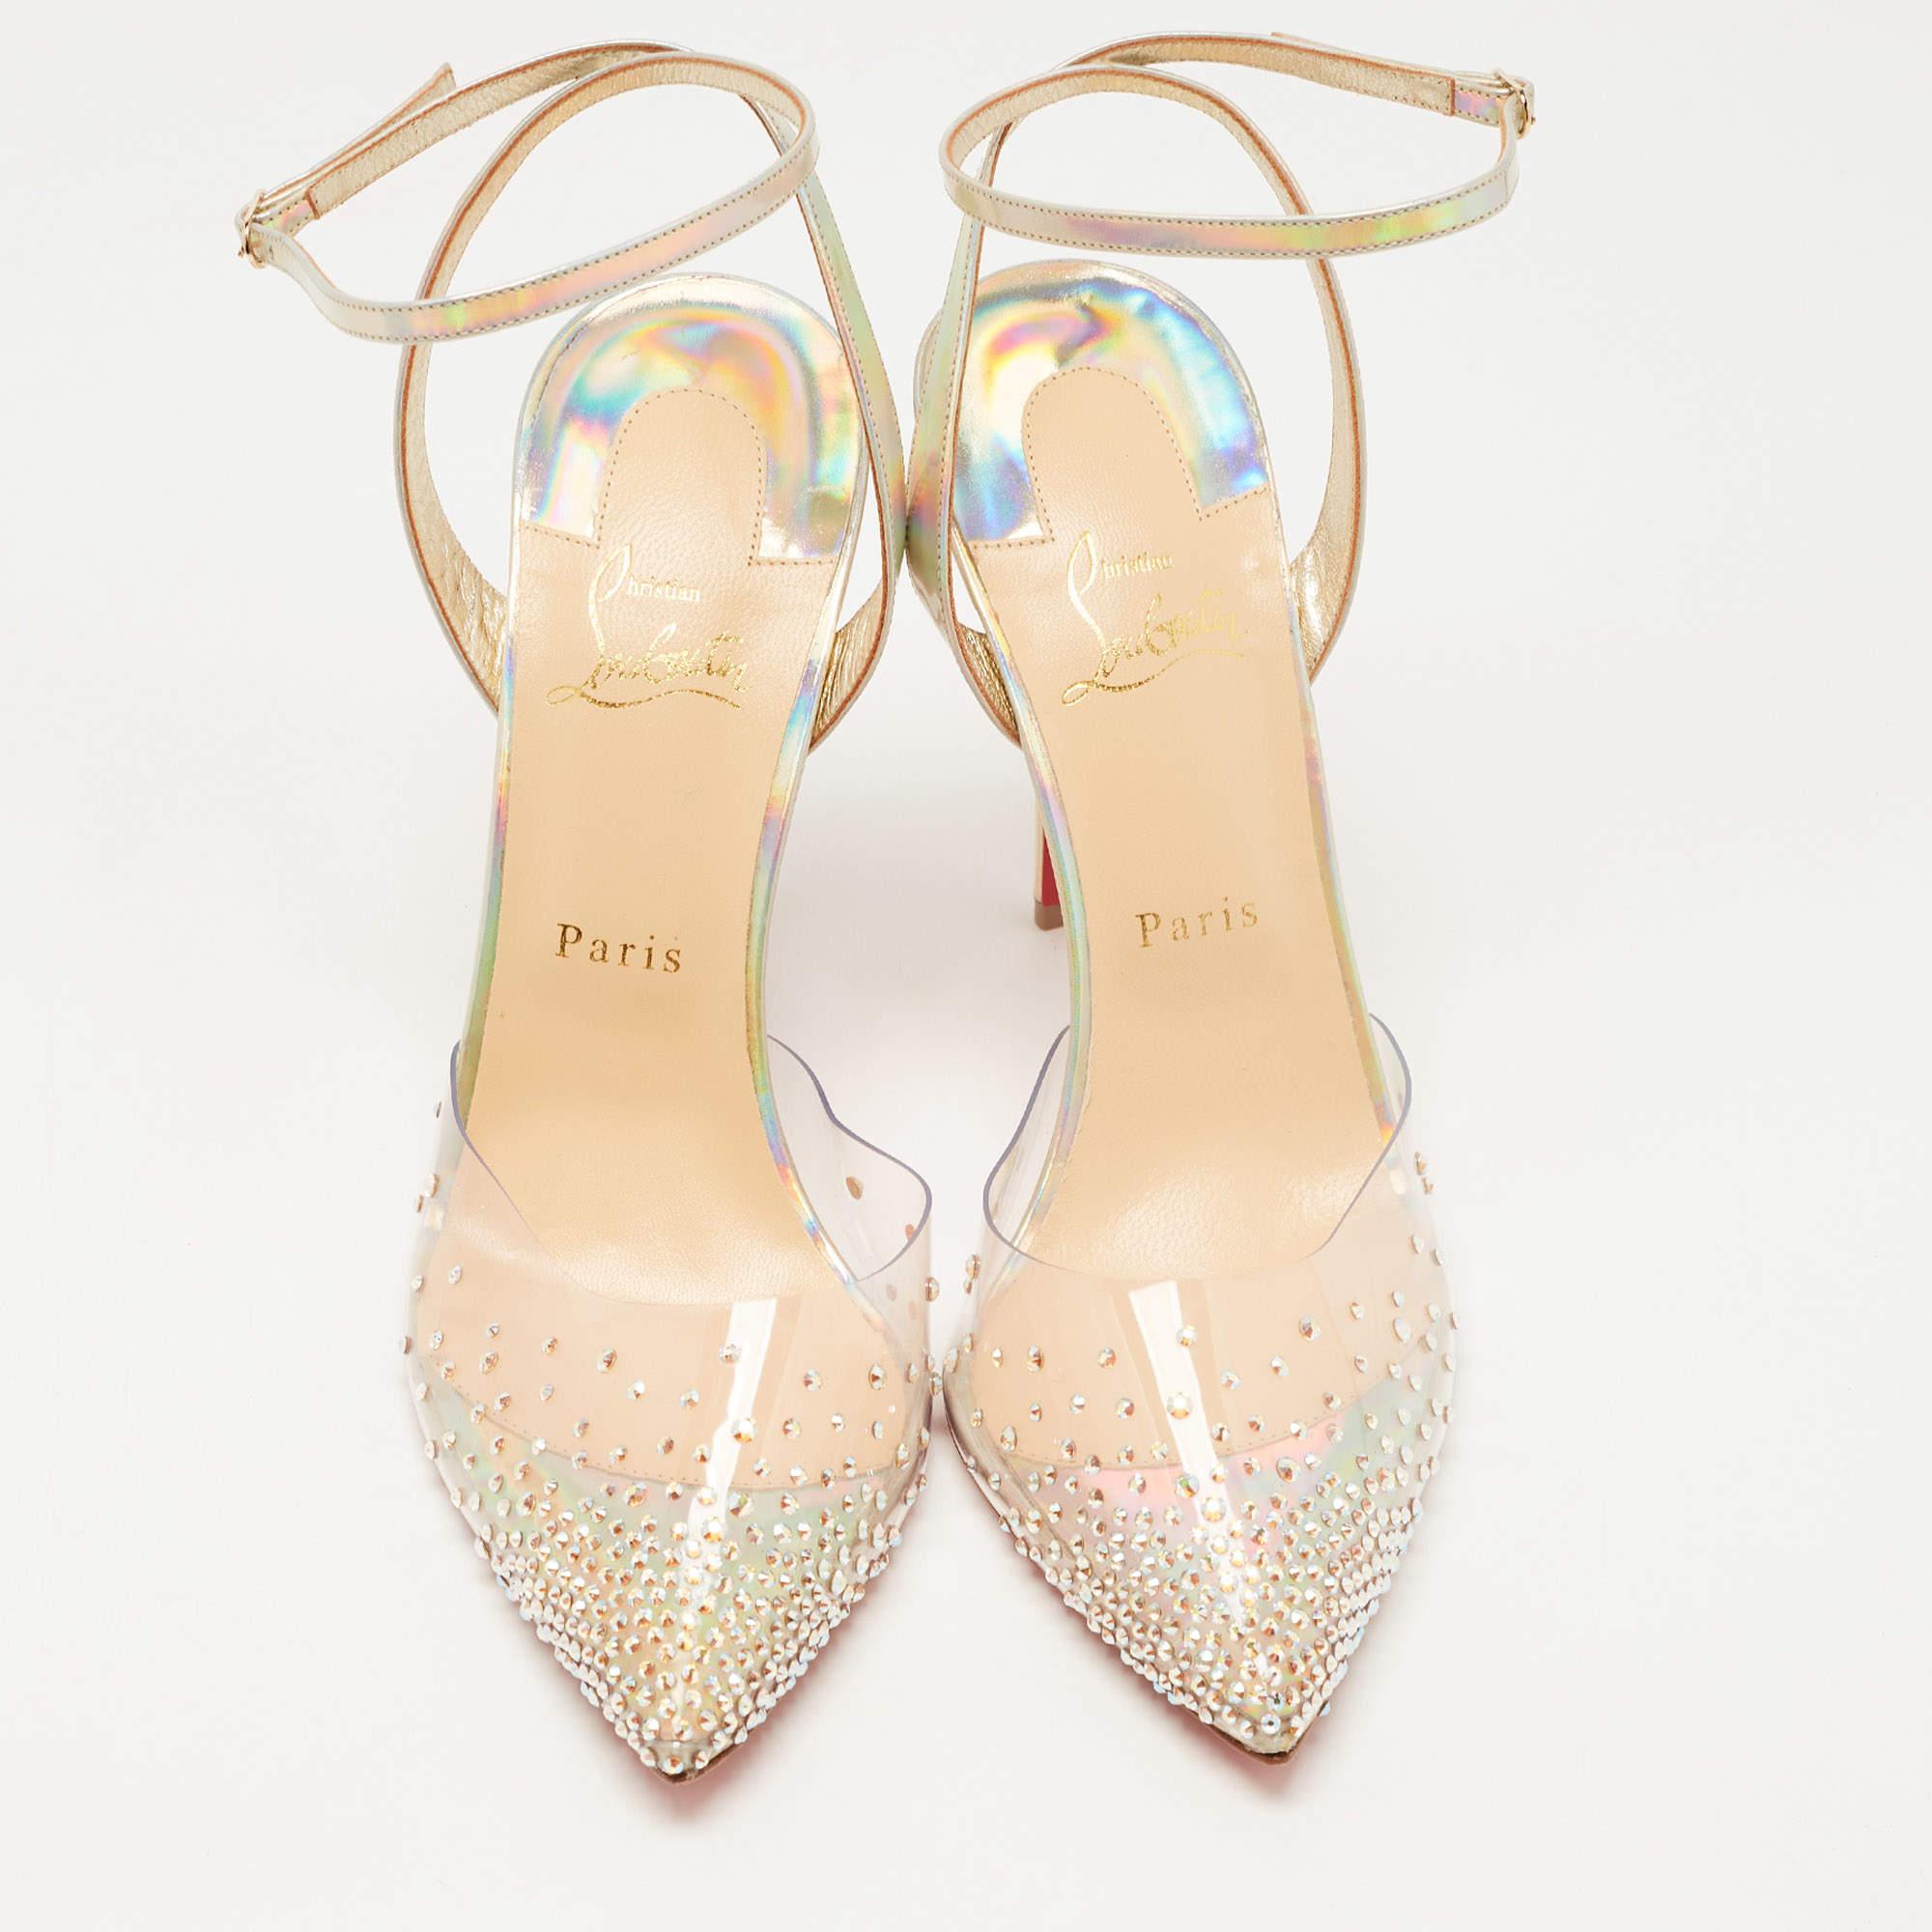 Create the most eye-catching party looks by wearing these Christian Louboutin pumps. Constructed from iridescent leather and clear PVC, these pointed-toe pumps feature buckled straps around the ankles, slim heels, and studs embellished on the toes.

